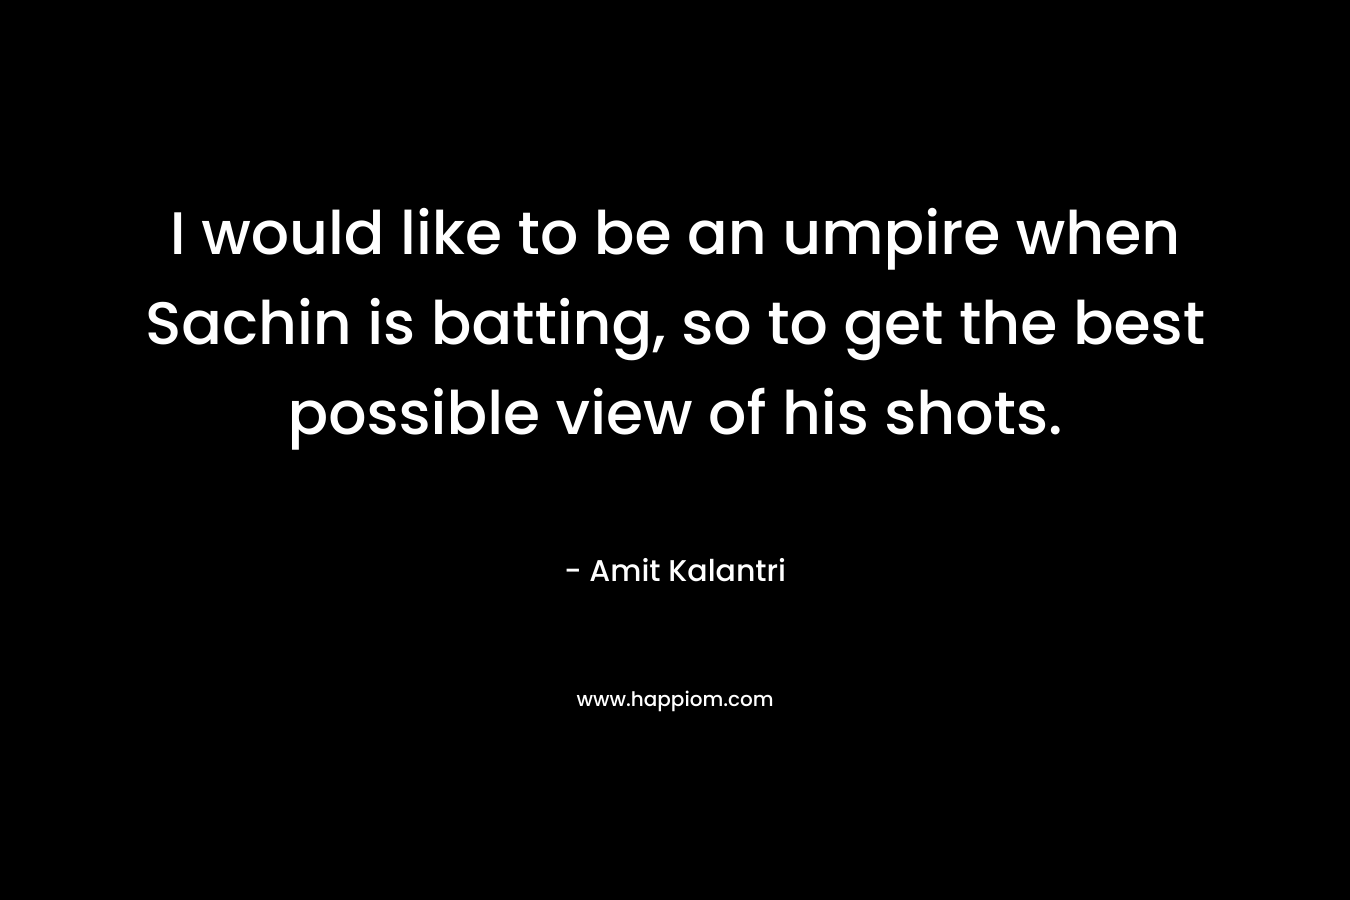 I would like to be an umpire when Sachin is batting, so to get the best possible view of his shots.